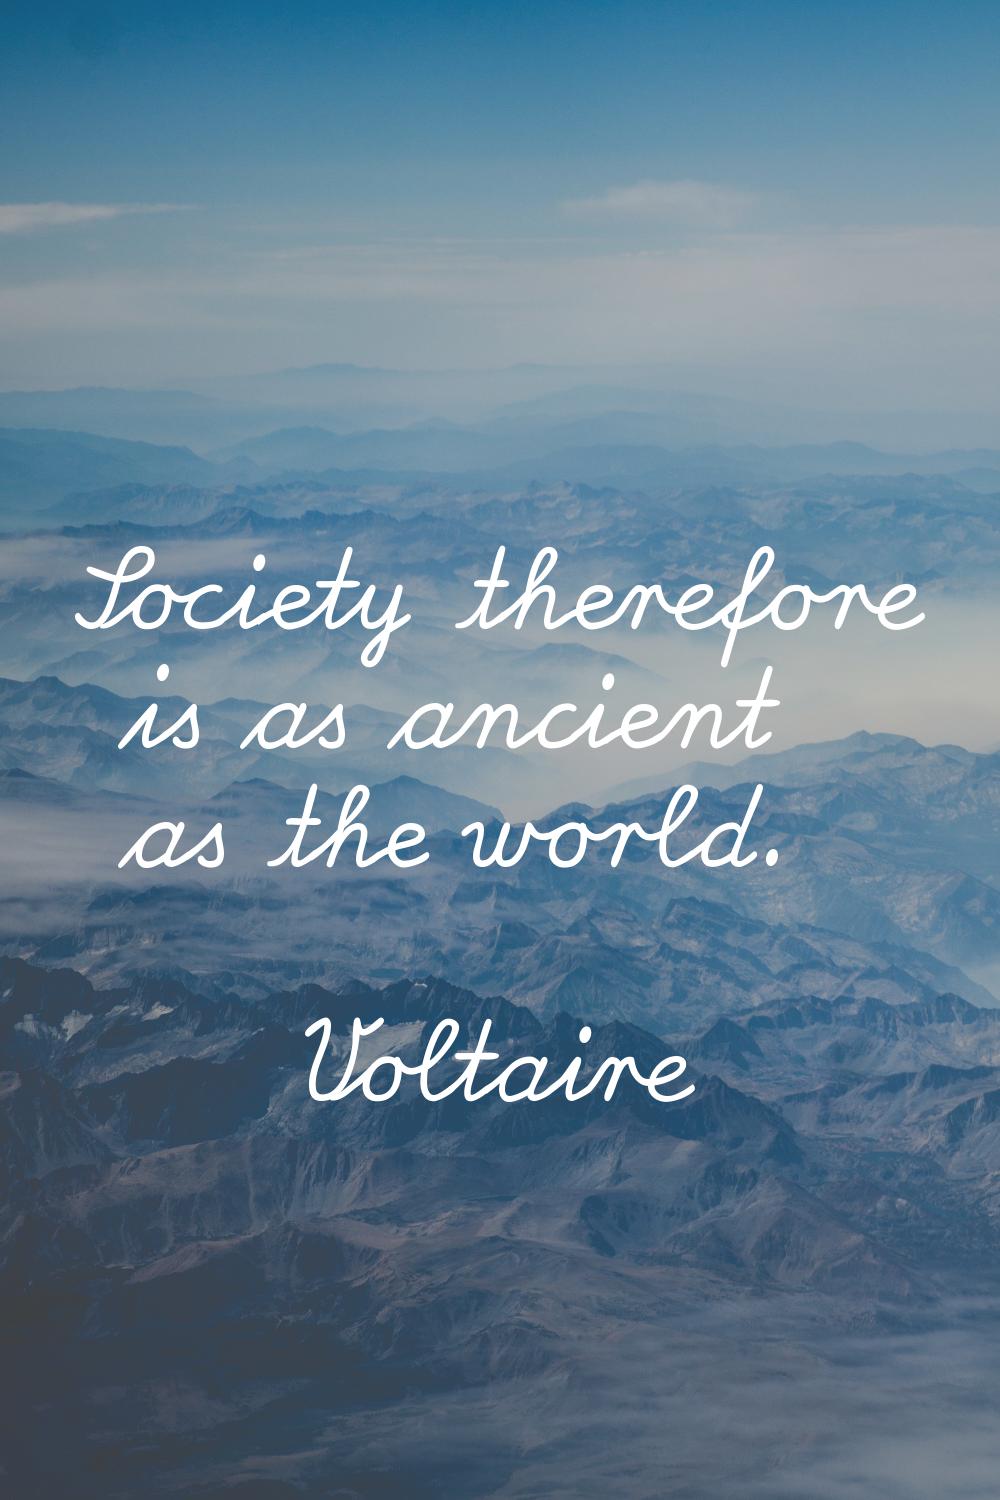 Society therefore is as ancient as the world.